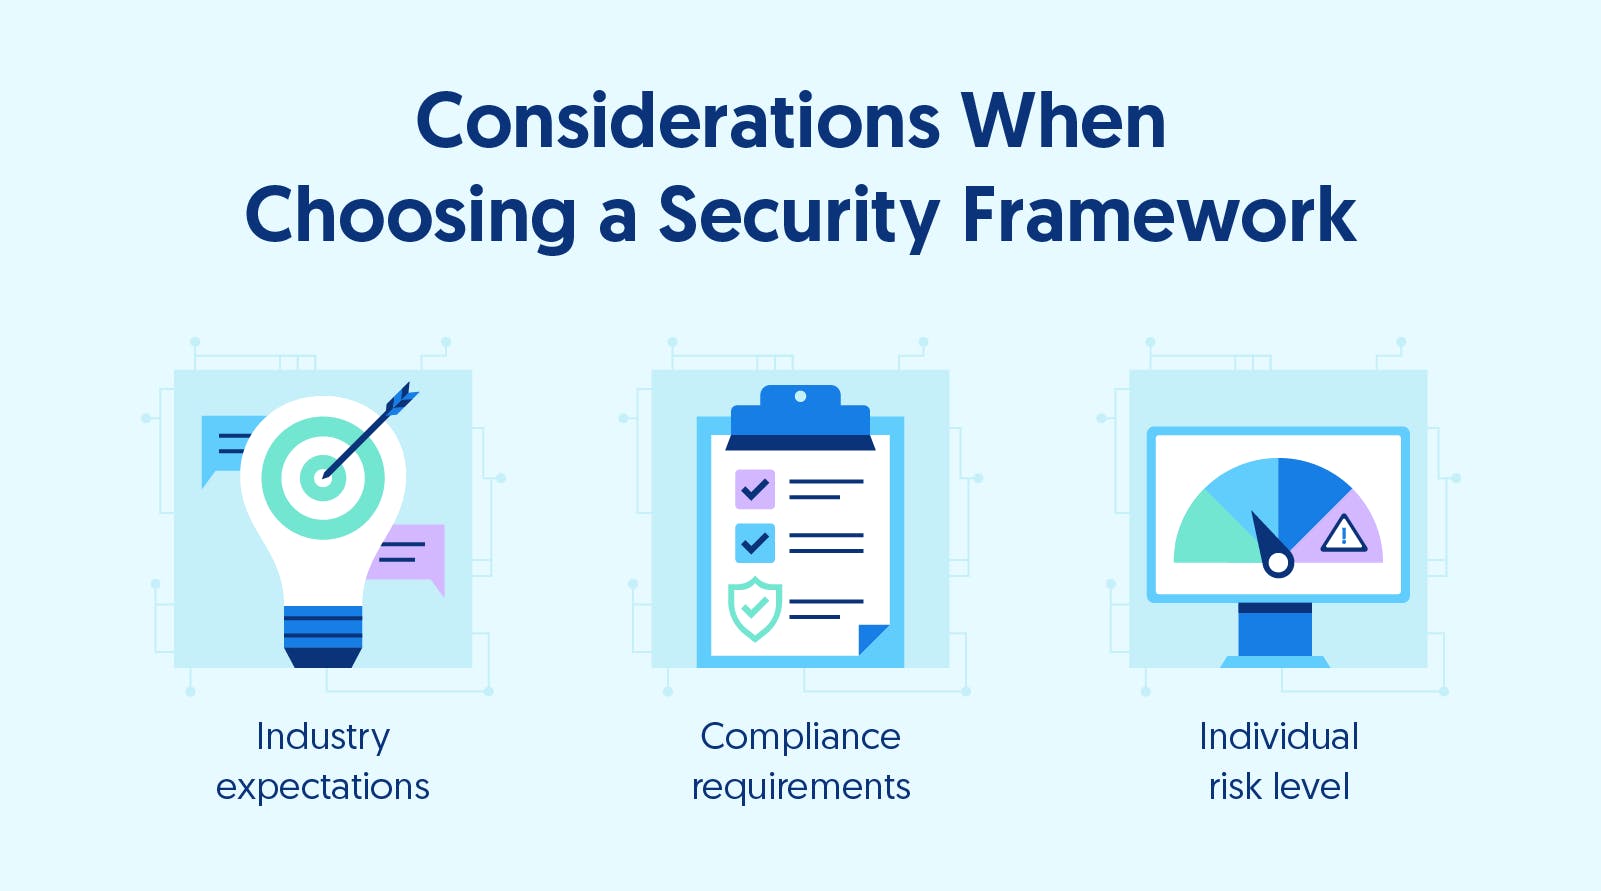 An illustration of three considerations that should be made when choosing security frameworks